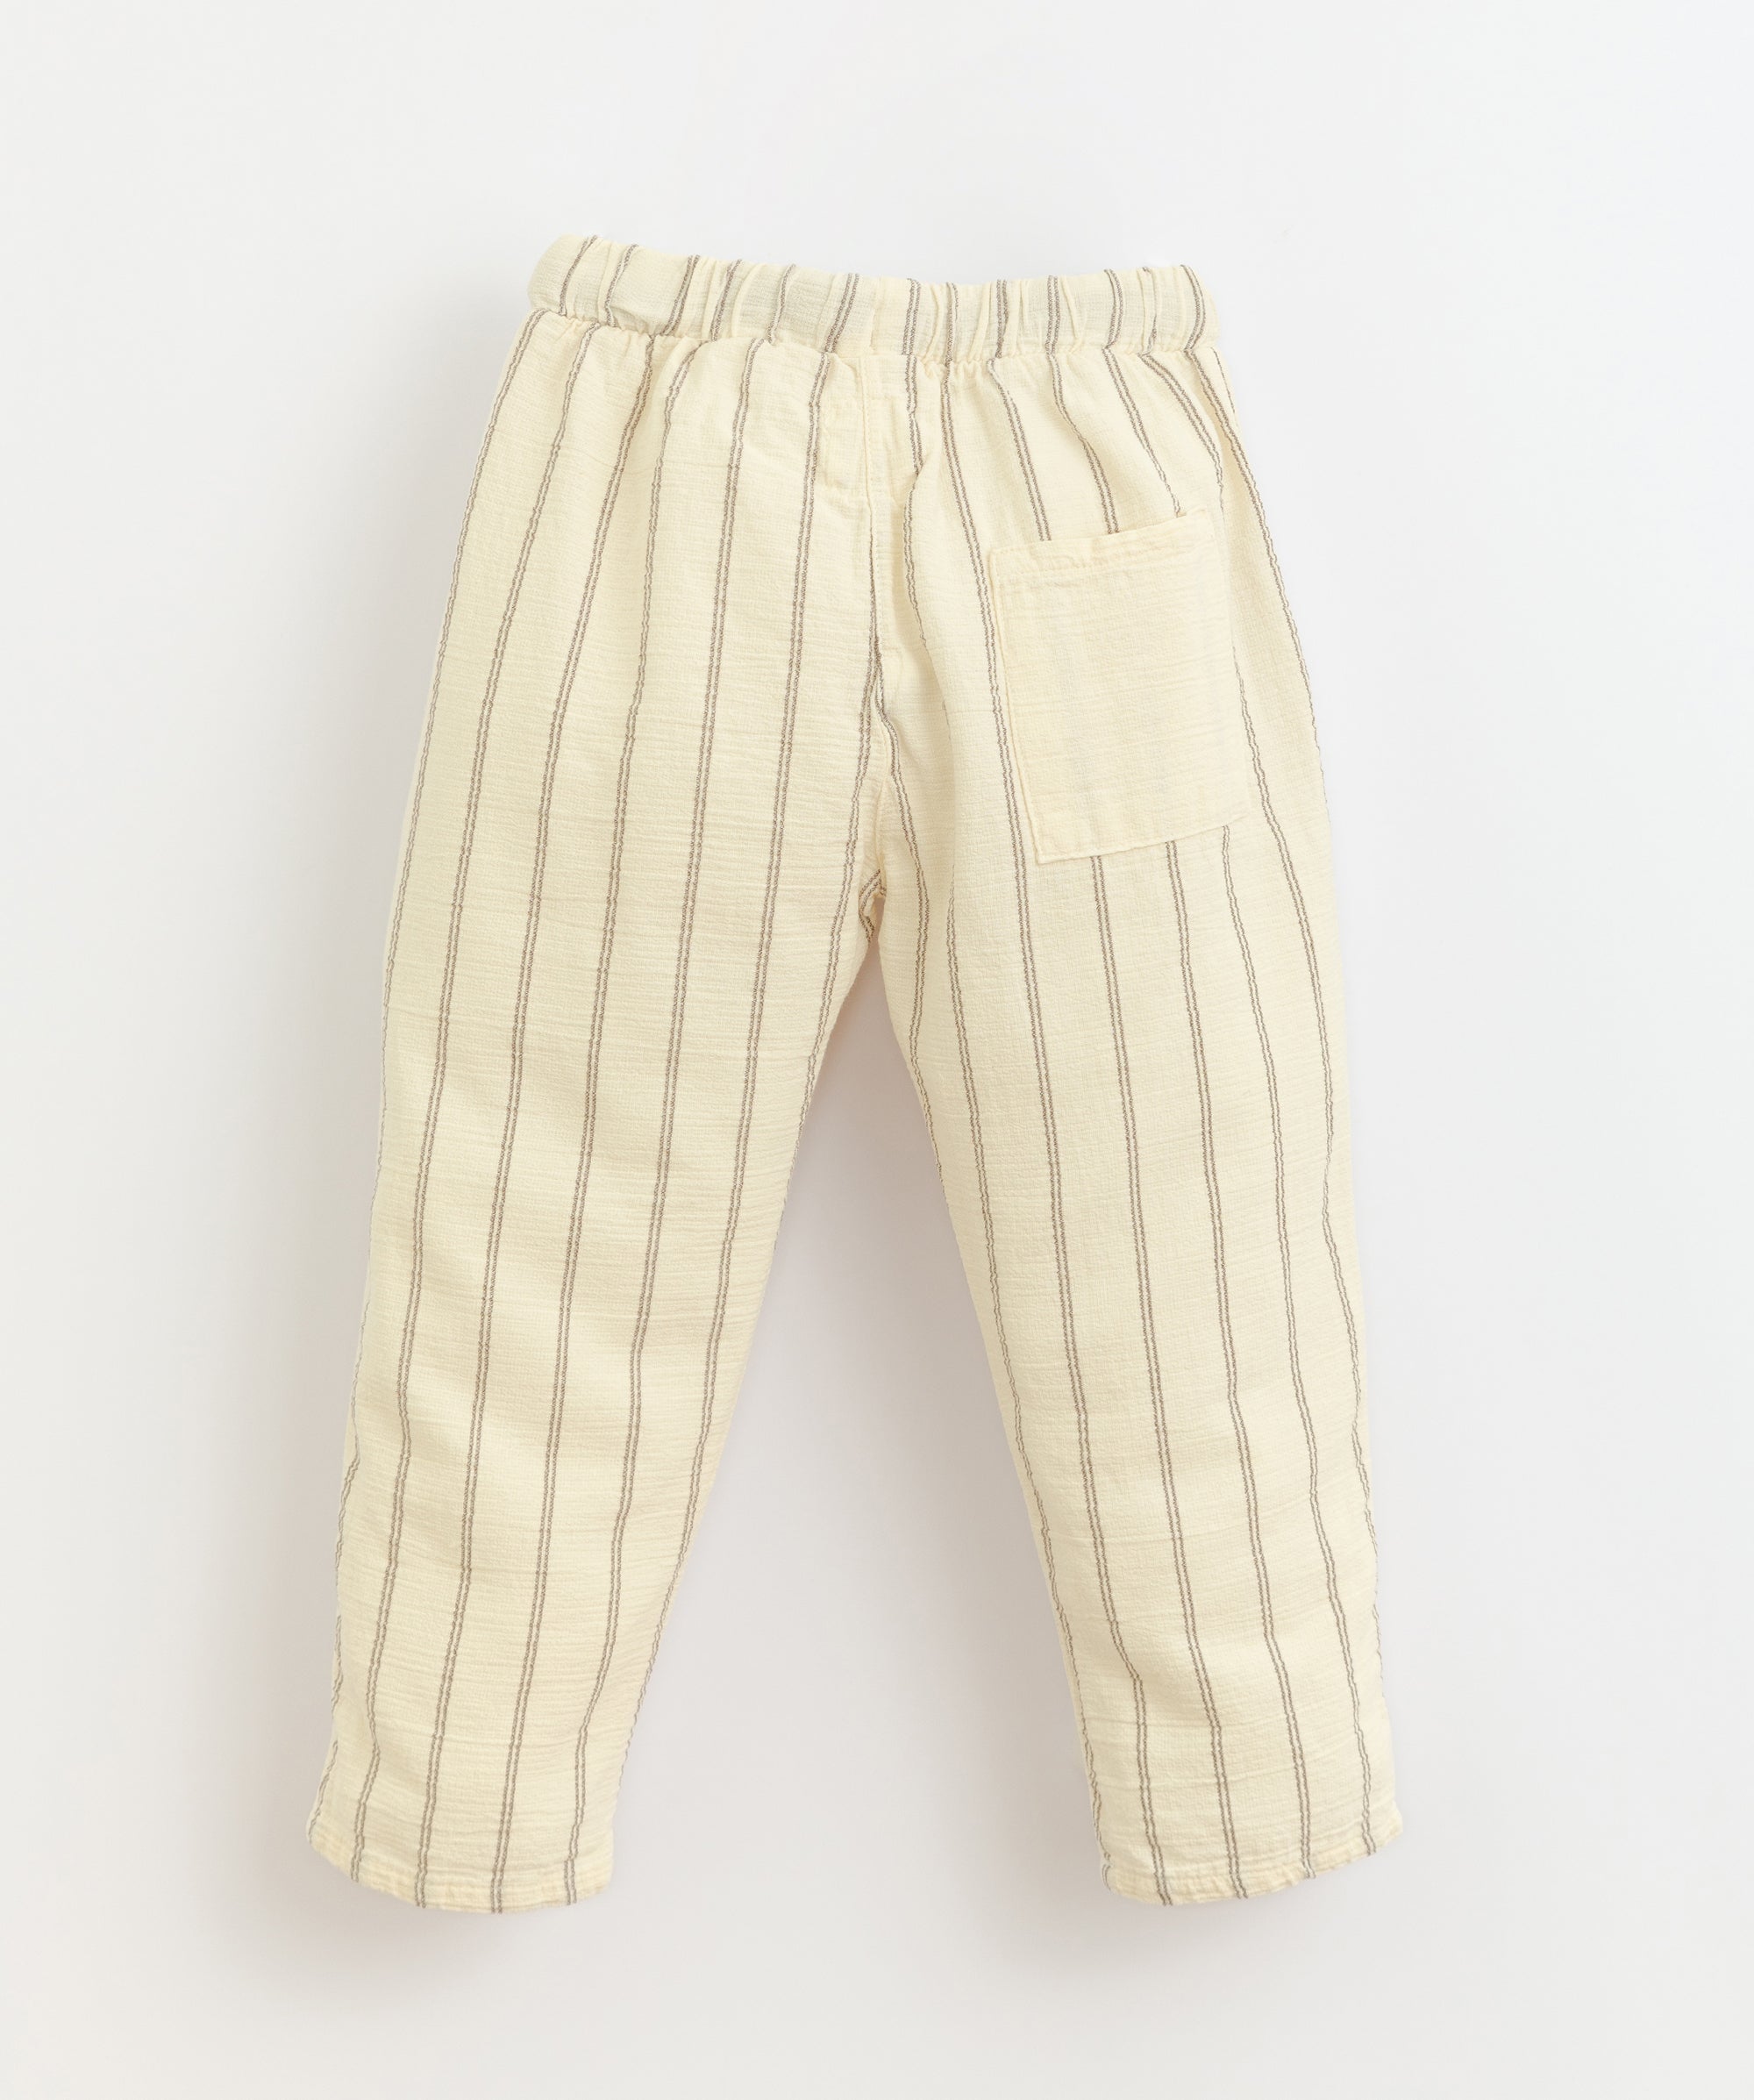 Baige trousers made of a mixture of woven and organic cotton. It has an elastic waist with an adjustable linen cord and one rear pocket. Made by Play Up.